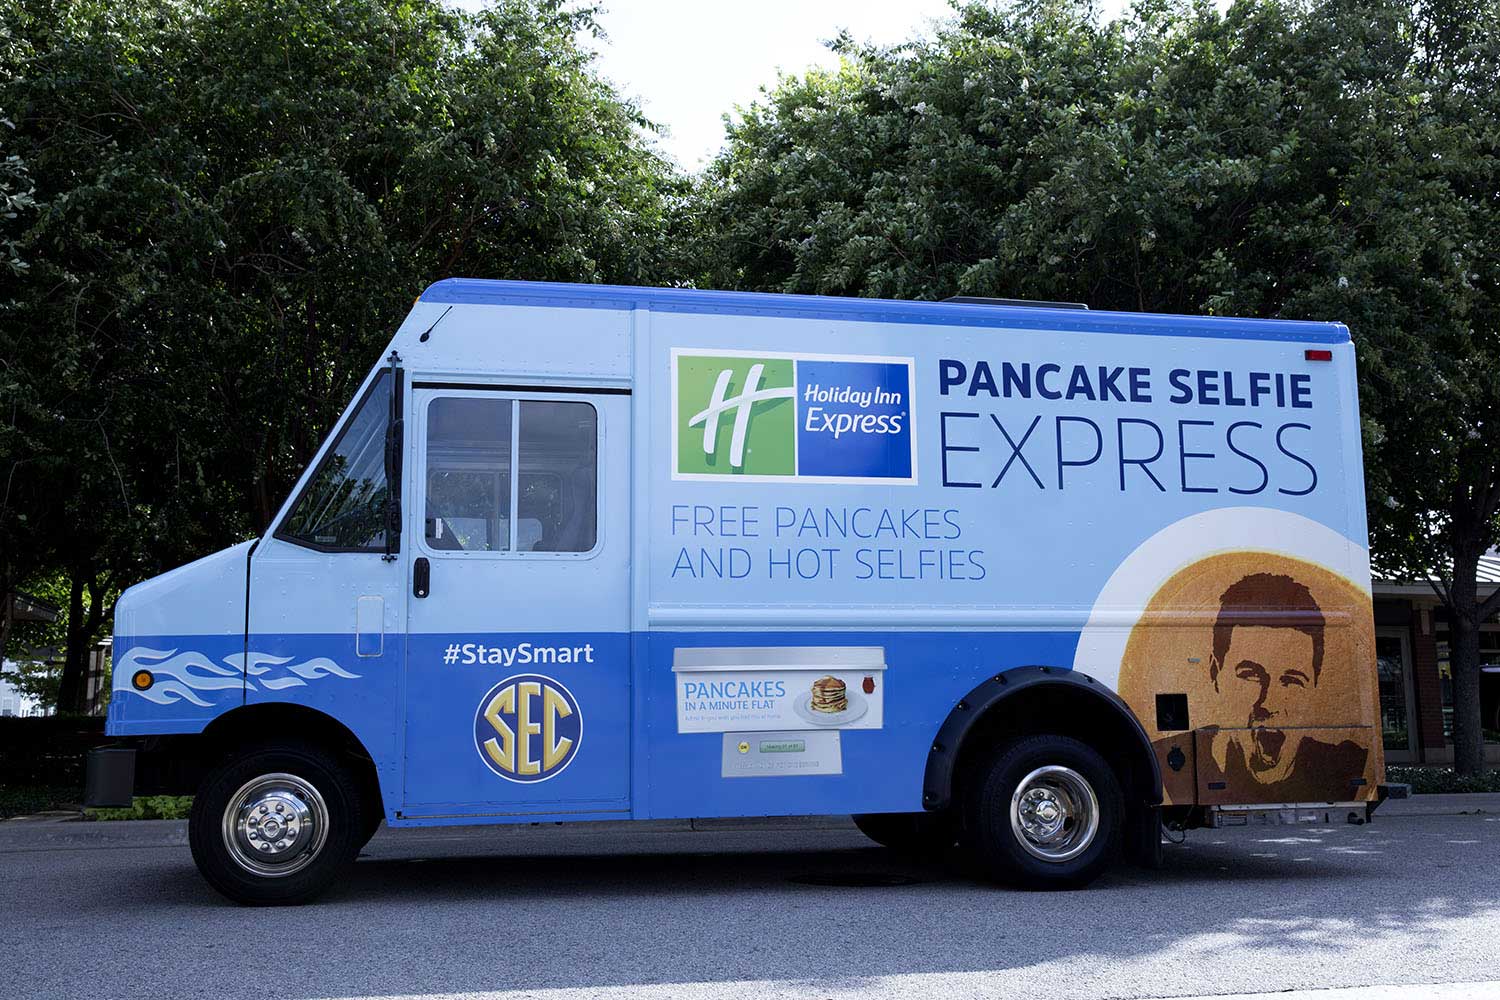 As the proud hotel sponsor of the SEC, the high tech food truck will travel to select SEC football games this fall to celebrate game day alongside SEC Nation.